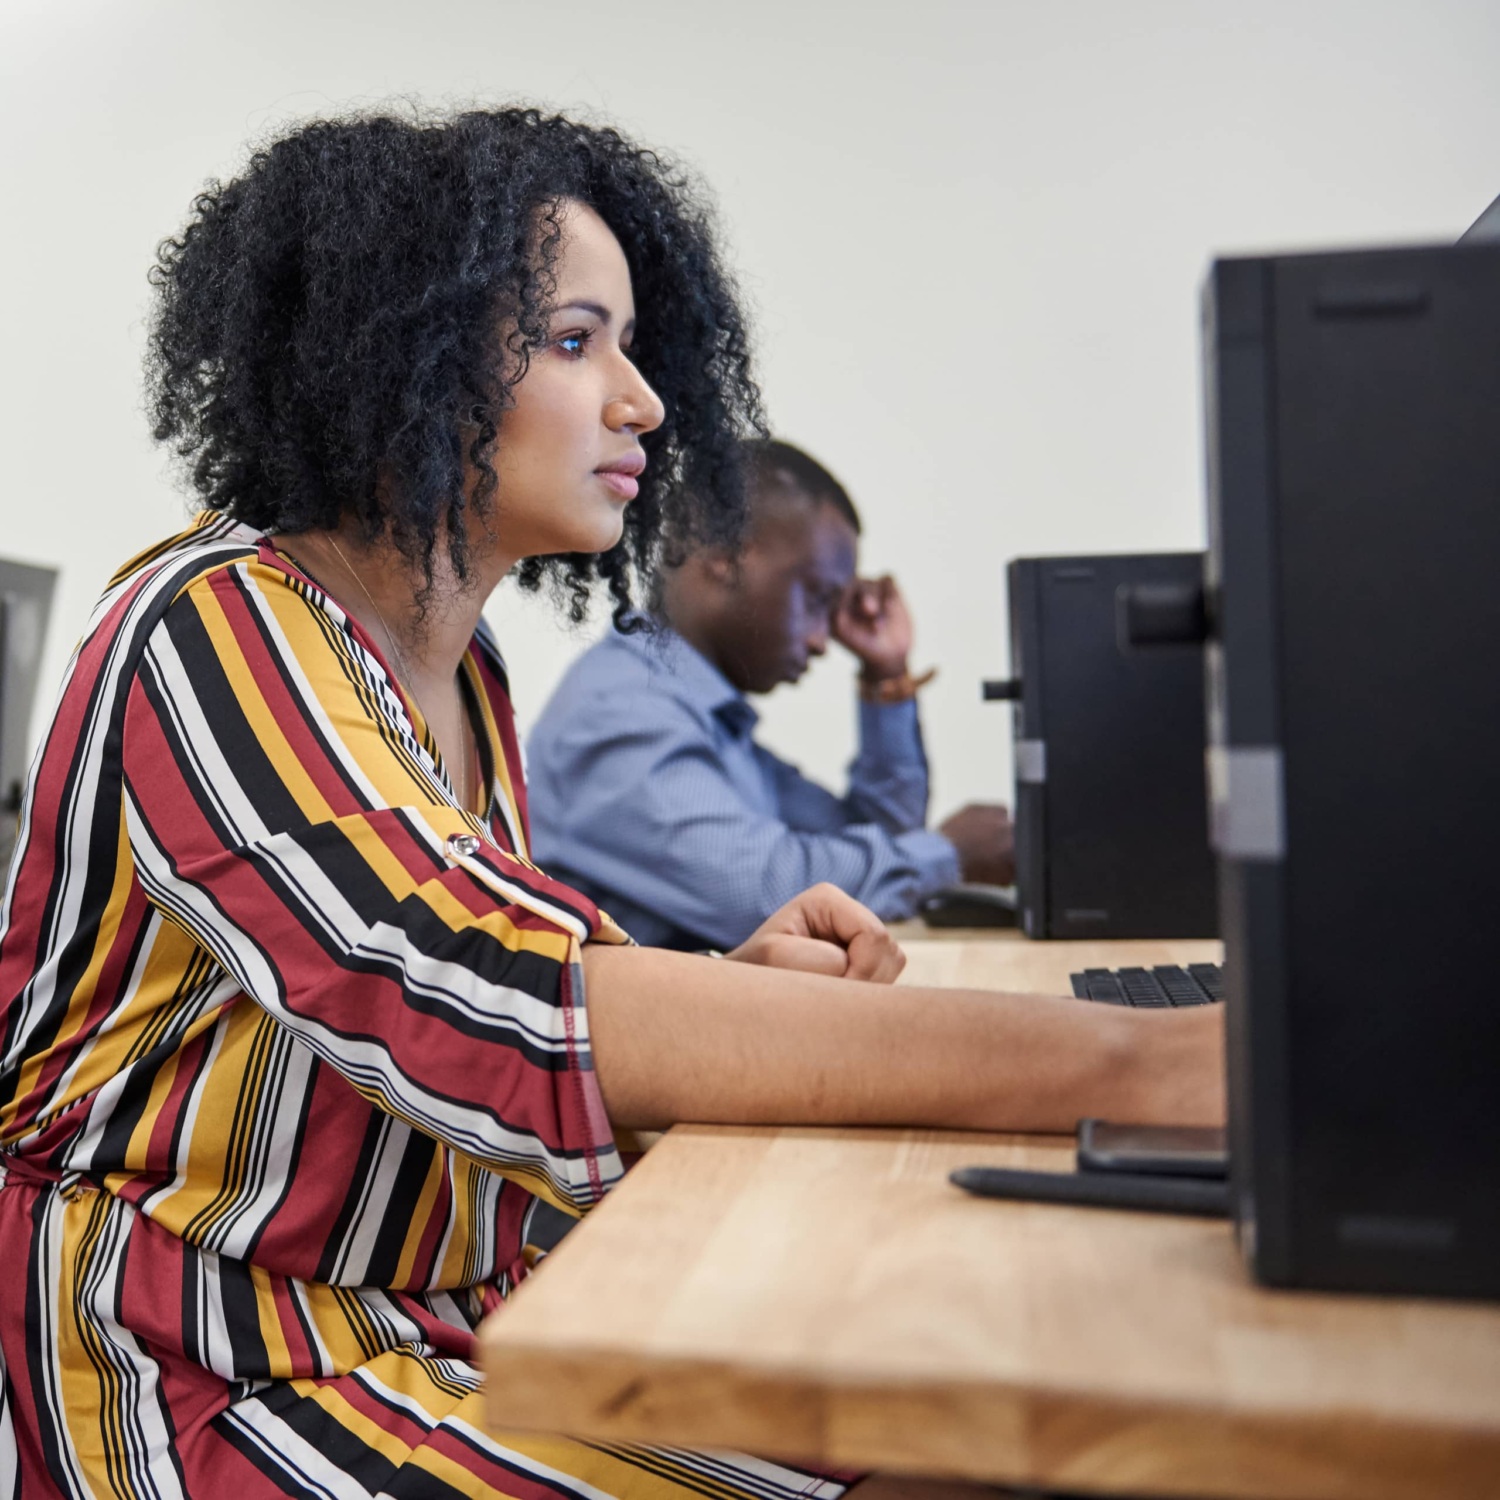 Tuition-Free IT Education: Computer Job Training with Per Scholas